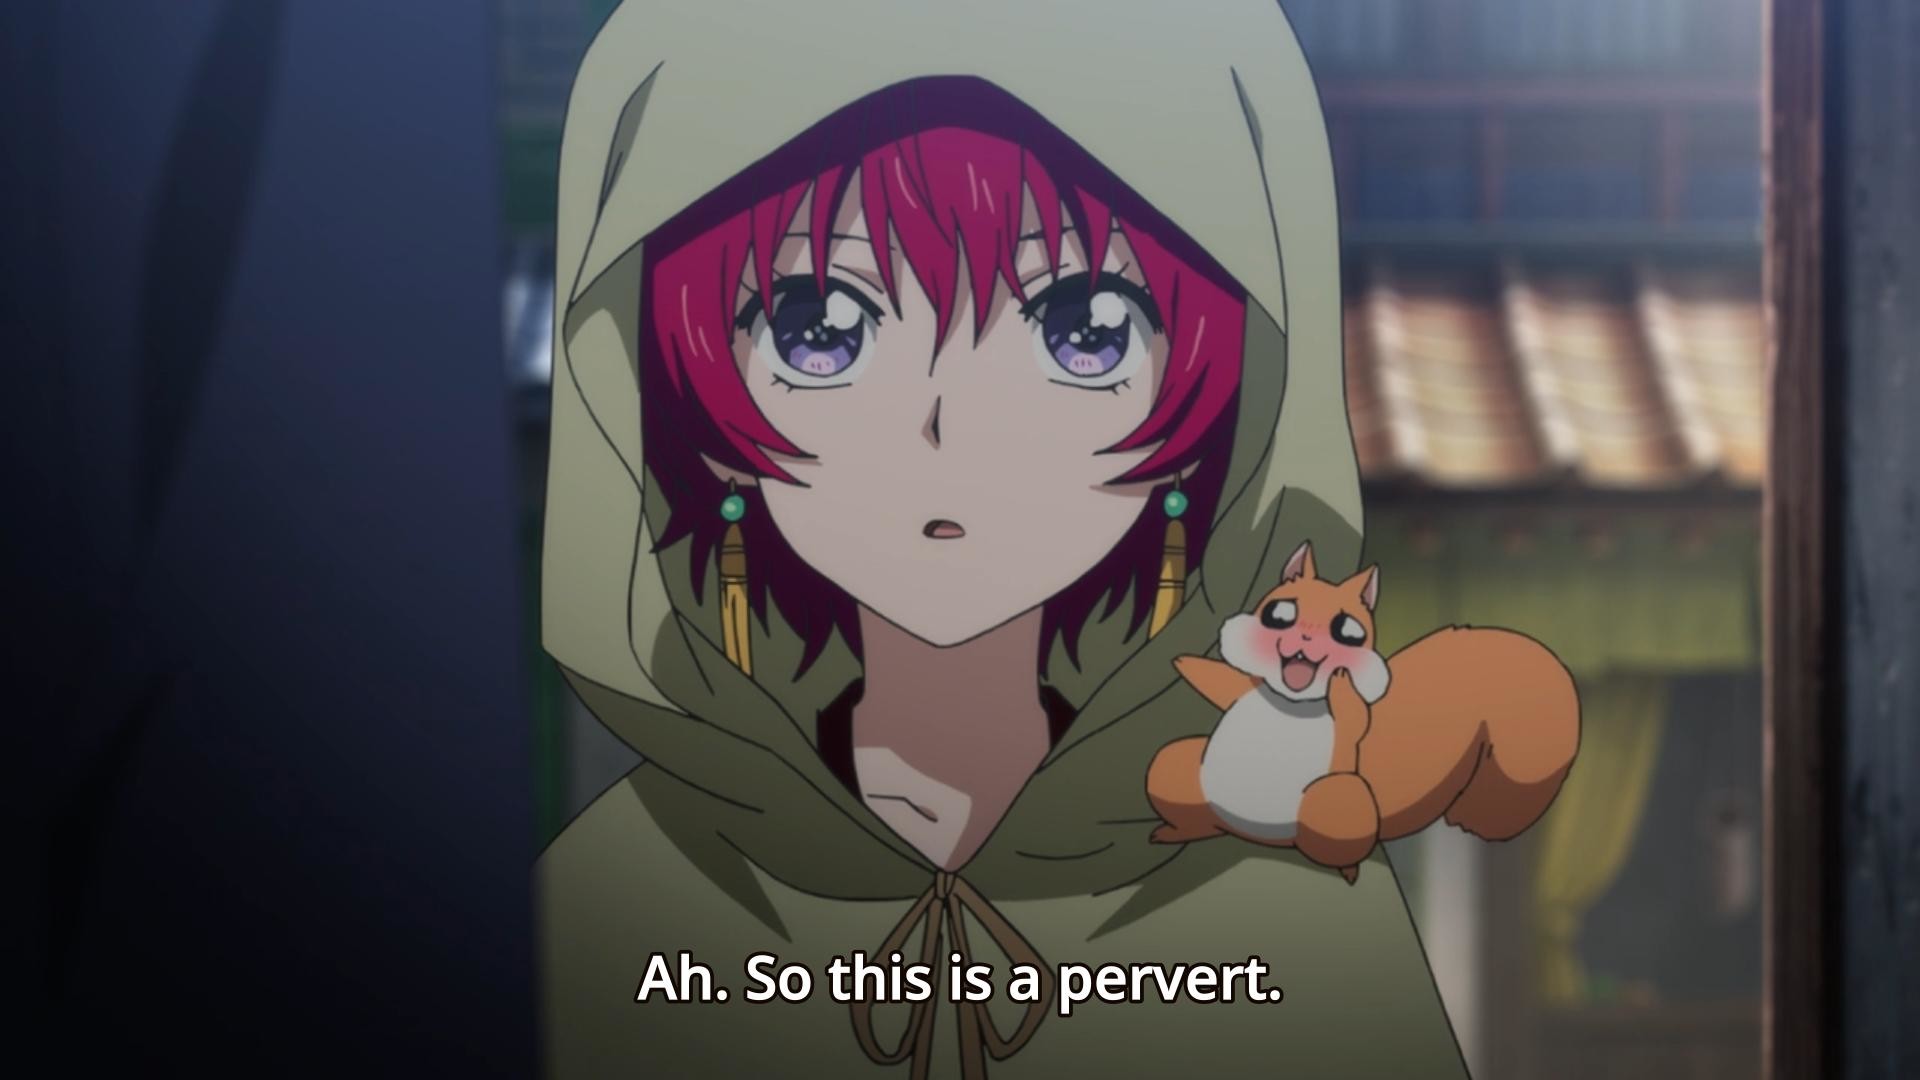 1920x1080 Oh Yona.